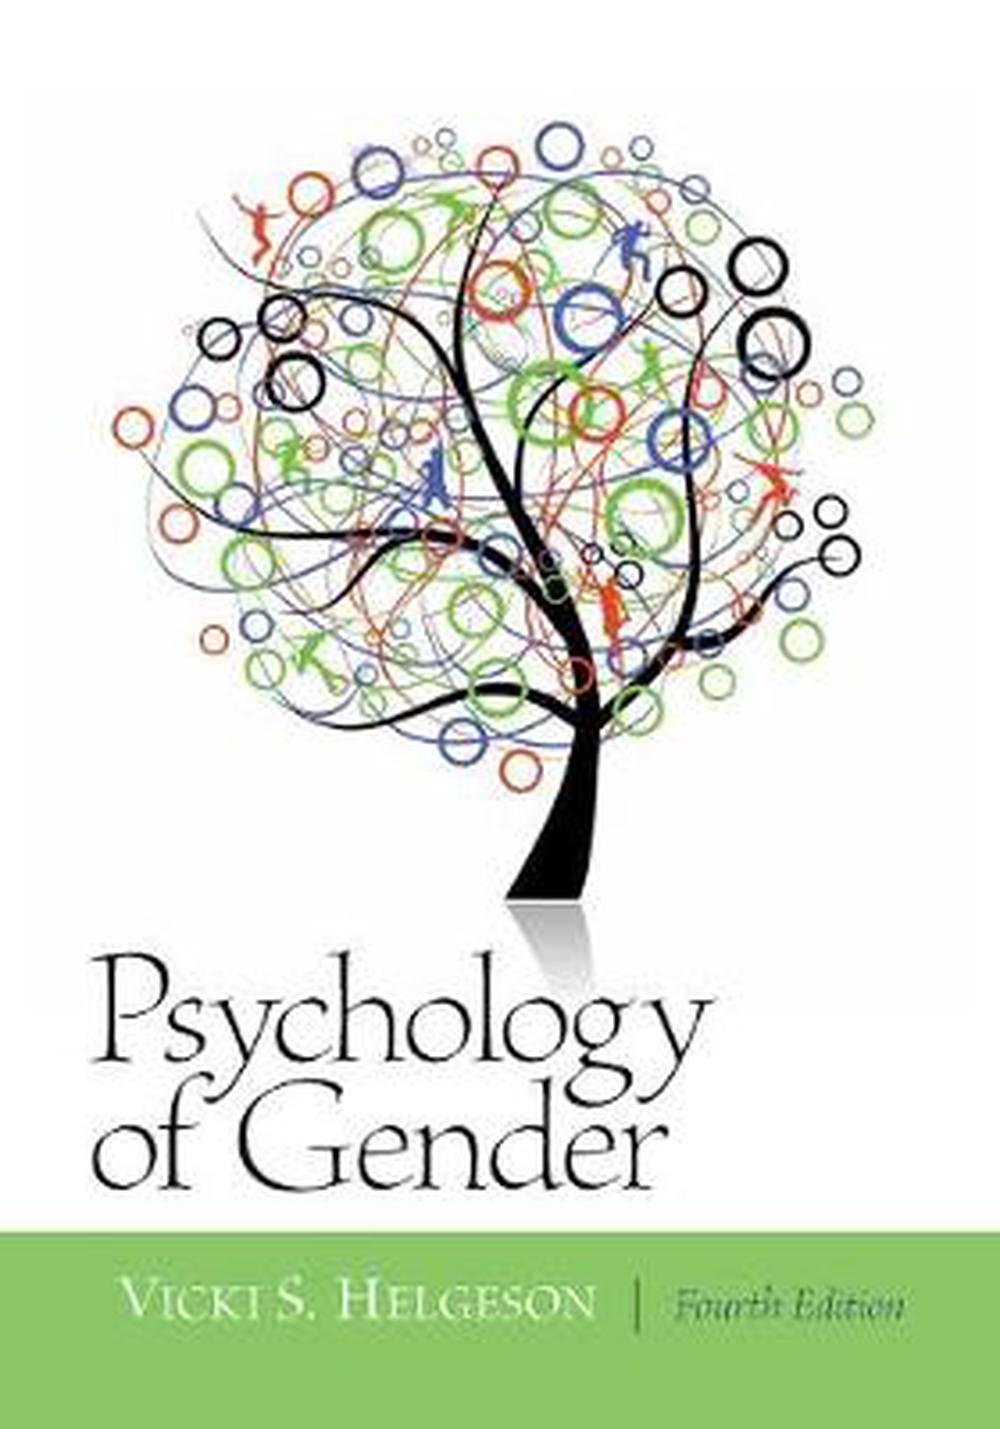 Psychology Of Gender Fourth Edition By Vicki Helgeson English Paperback Book 9780205050185 Ebay